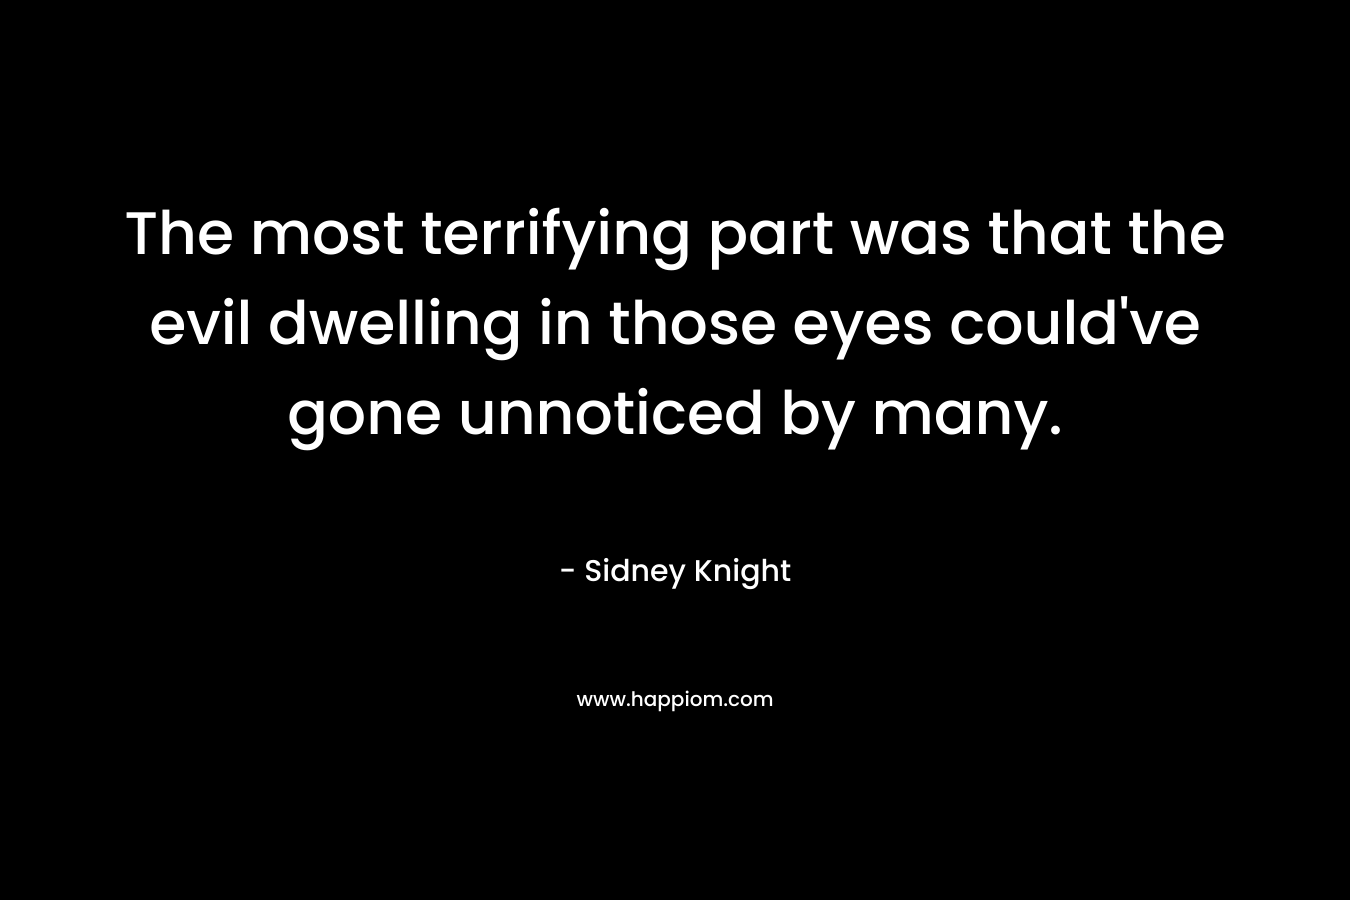 The most terrifying part was that the evil dwelling in those eyes could’ve gone unnoticed by many. – Sidney Knight